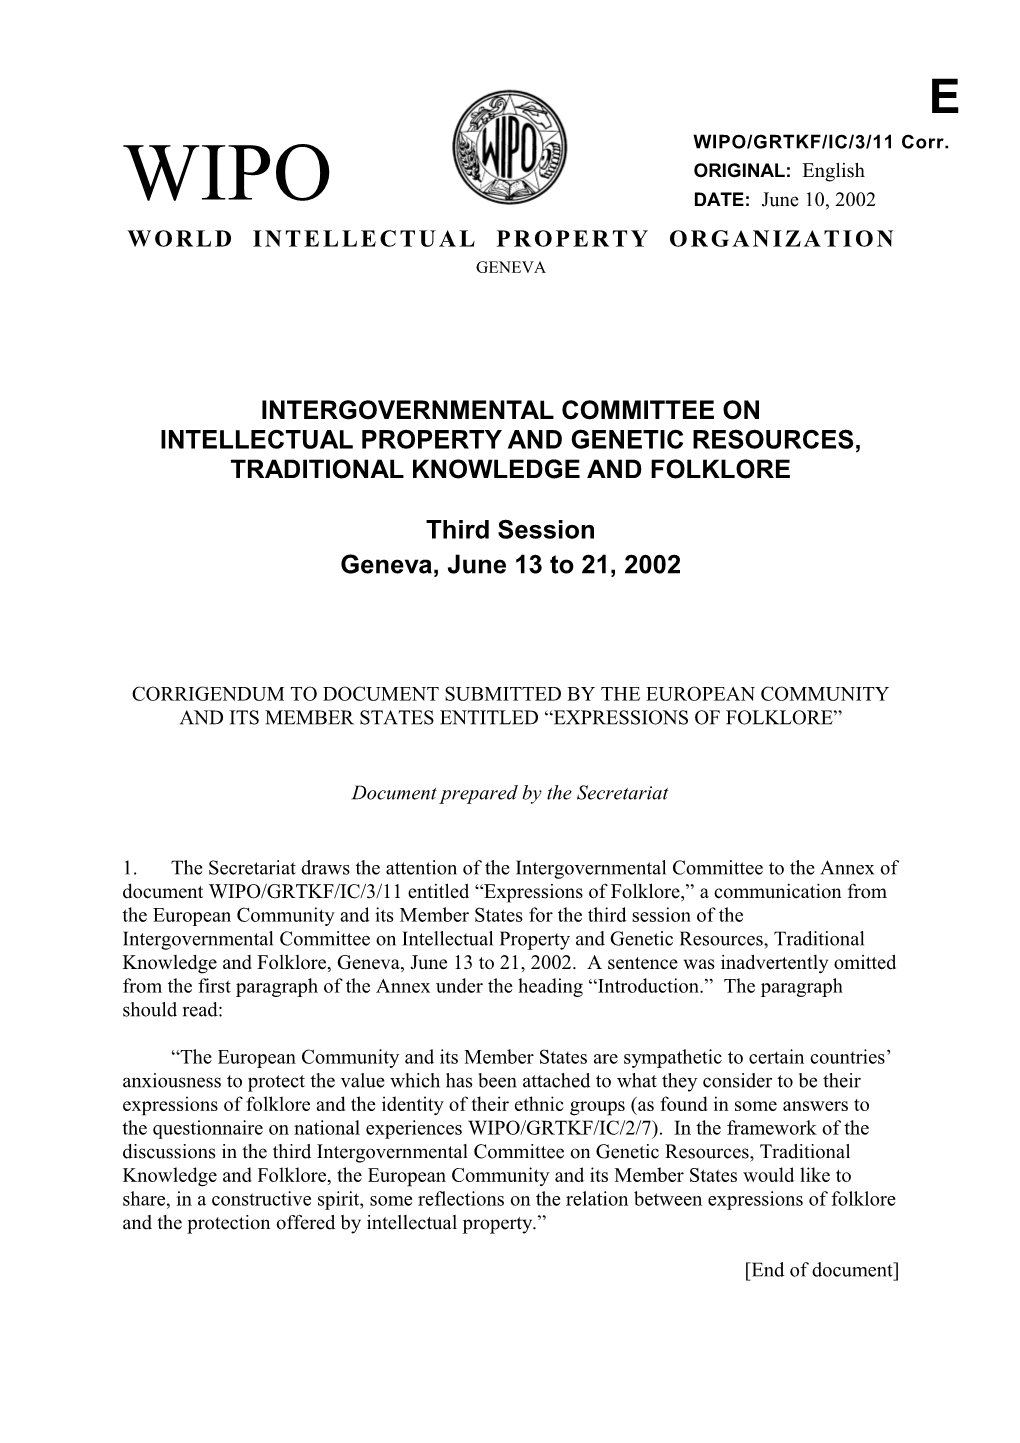 WIPO/GRTKF/IC/3/11 CORR.: Corrigendum to Document Submitted by the European Community And